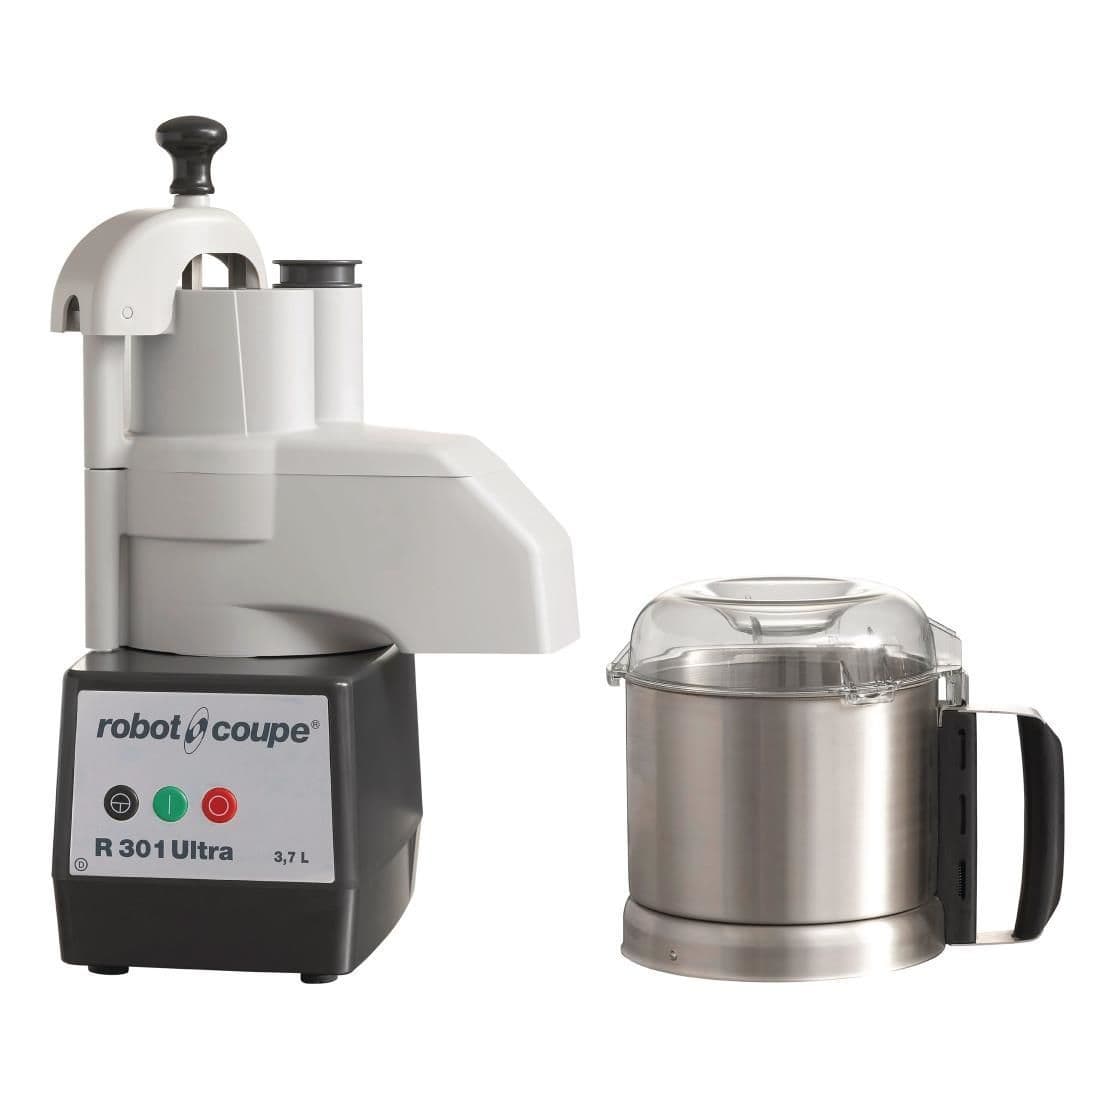 Robot Coupe Food Processor with Veg Prep Attachment R301 Ultra (2540)